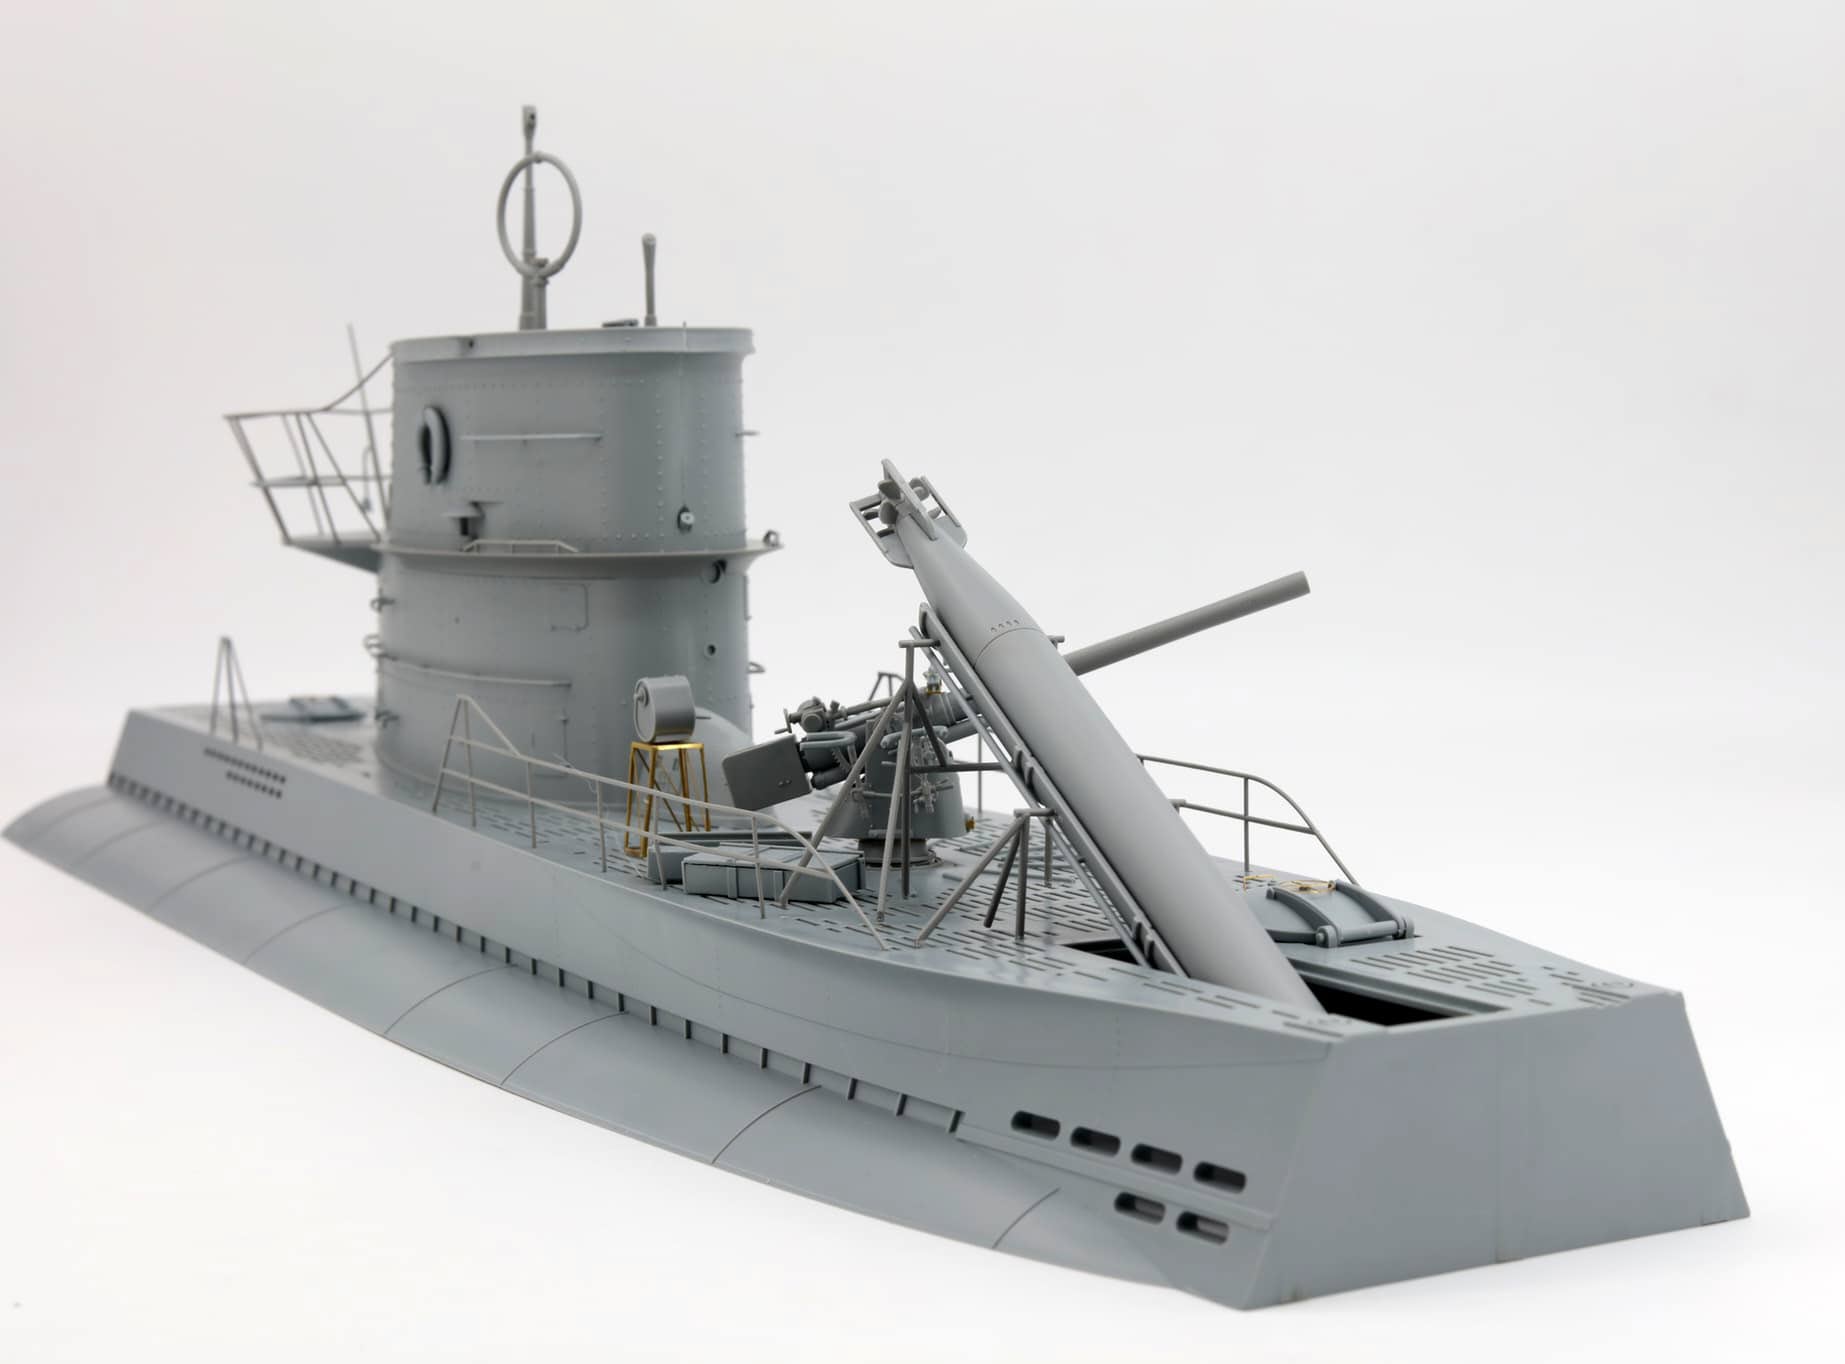 The Modelling News: Preview: Border Model's new 1/35th scale DKM Type VII-C  U-boat conning tower & deck